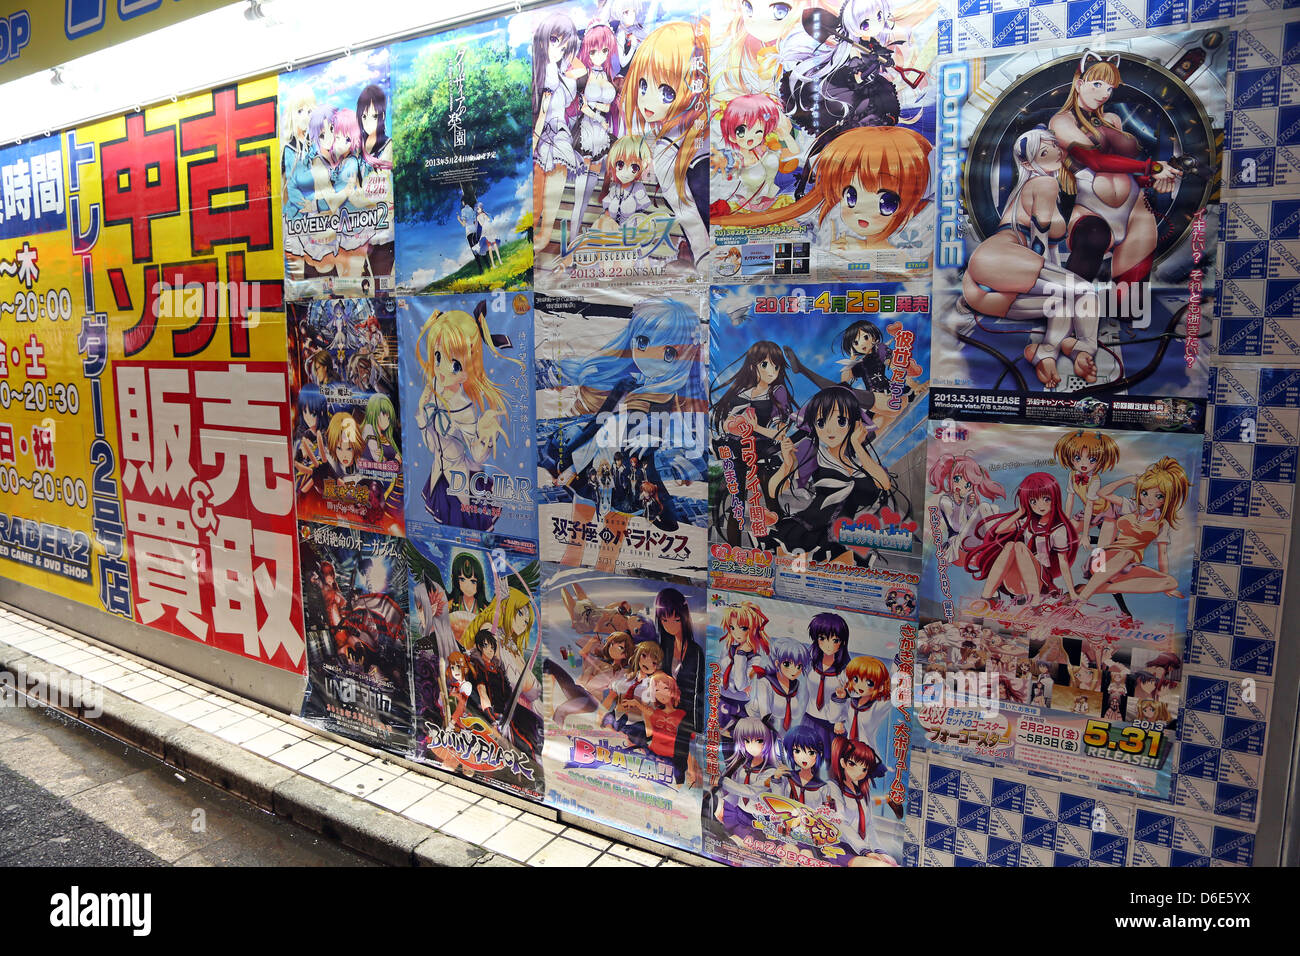 Japanese manga and anime advertising posters in Akihabara Electric Town in Tokyo, Japan Stock Photo